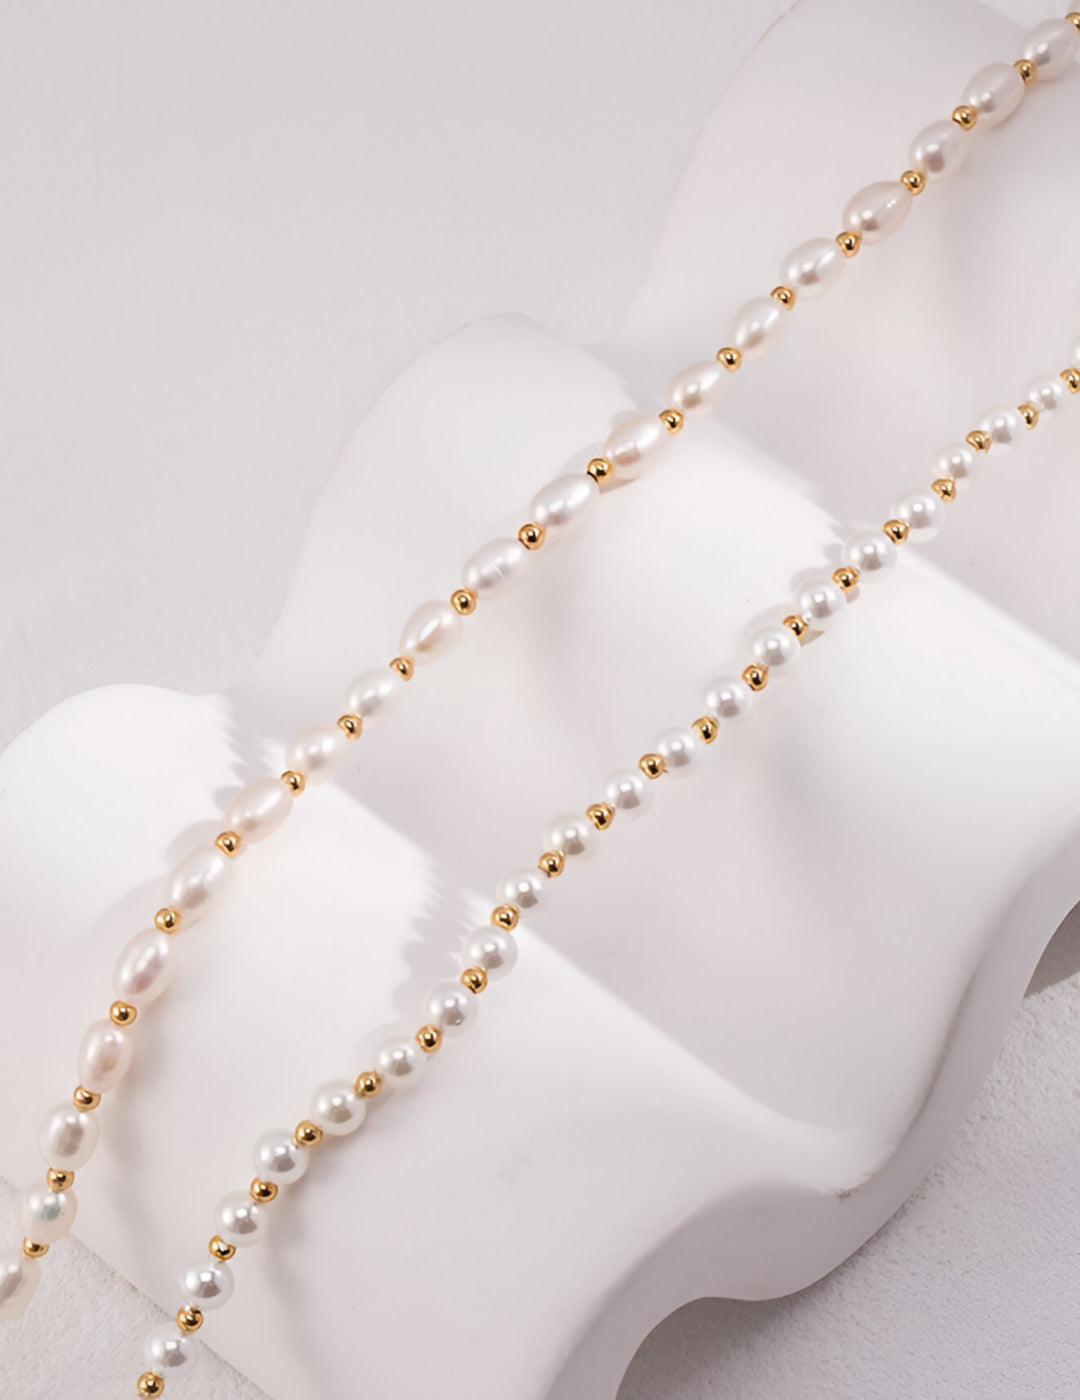 Simple Button Pearl Necklace  - S925 Sterling Silver with 18K Gold Vermeil  - Pearl Luminance - Elegant Essentials - Discover the allure of classic pearls - perfect for any occasion